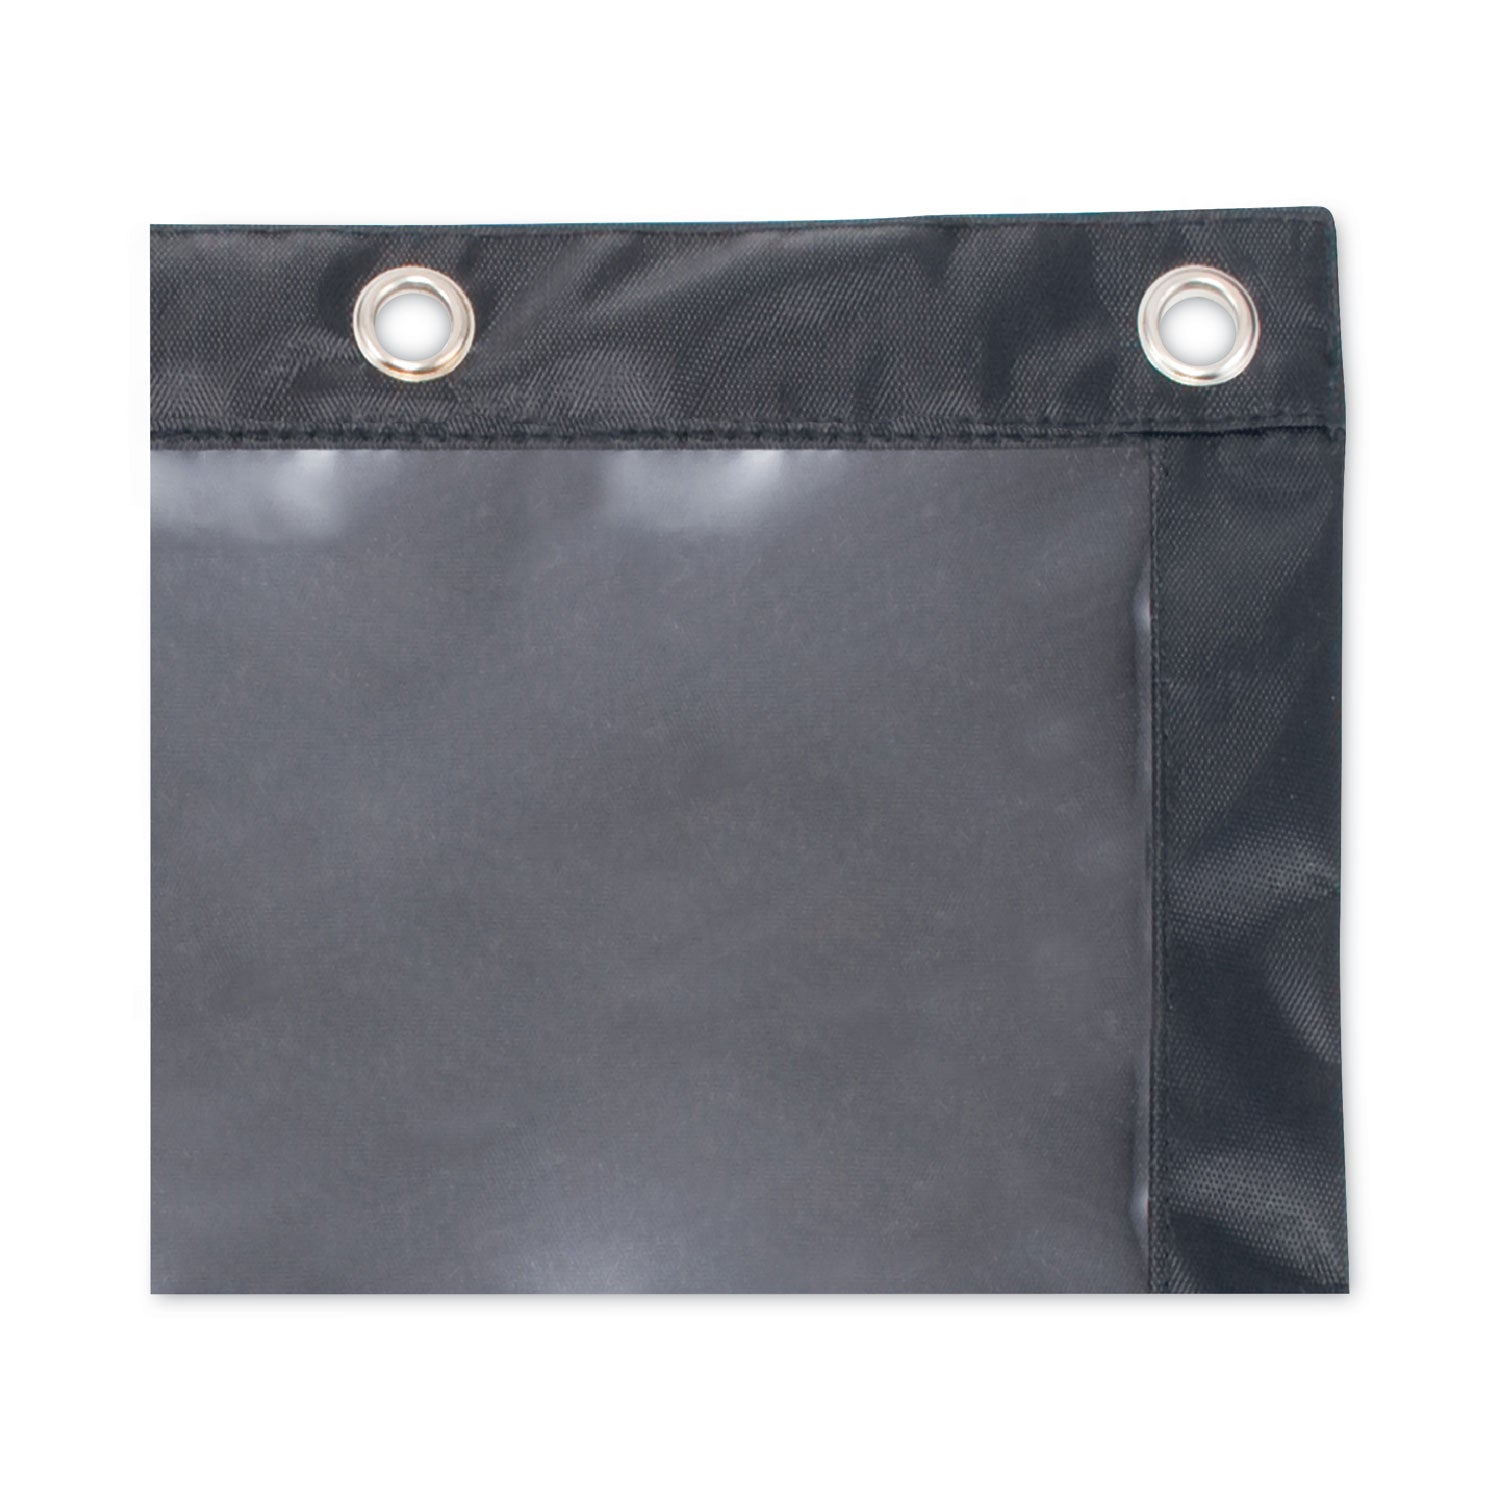 binder-pencil-pouch-10-x-738-black-clear-3-pack_avt63067 - 3